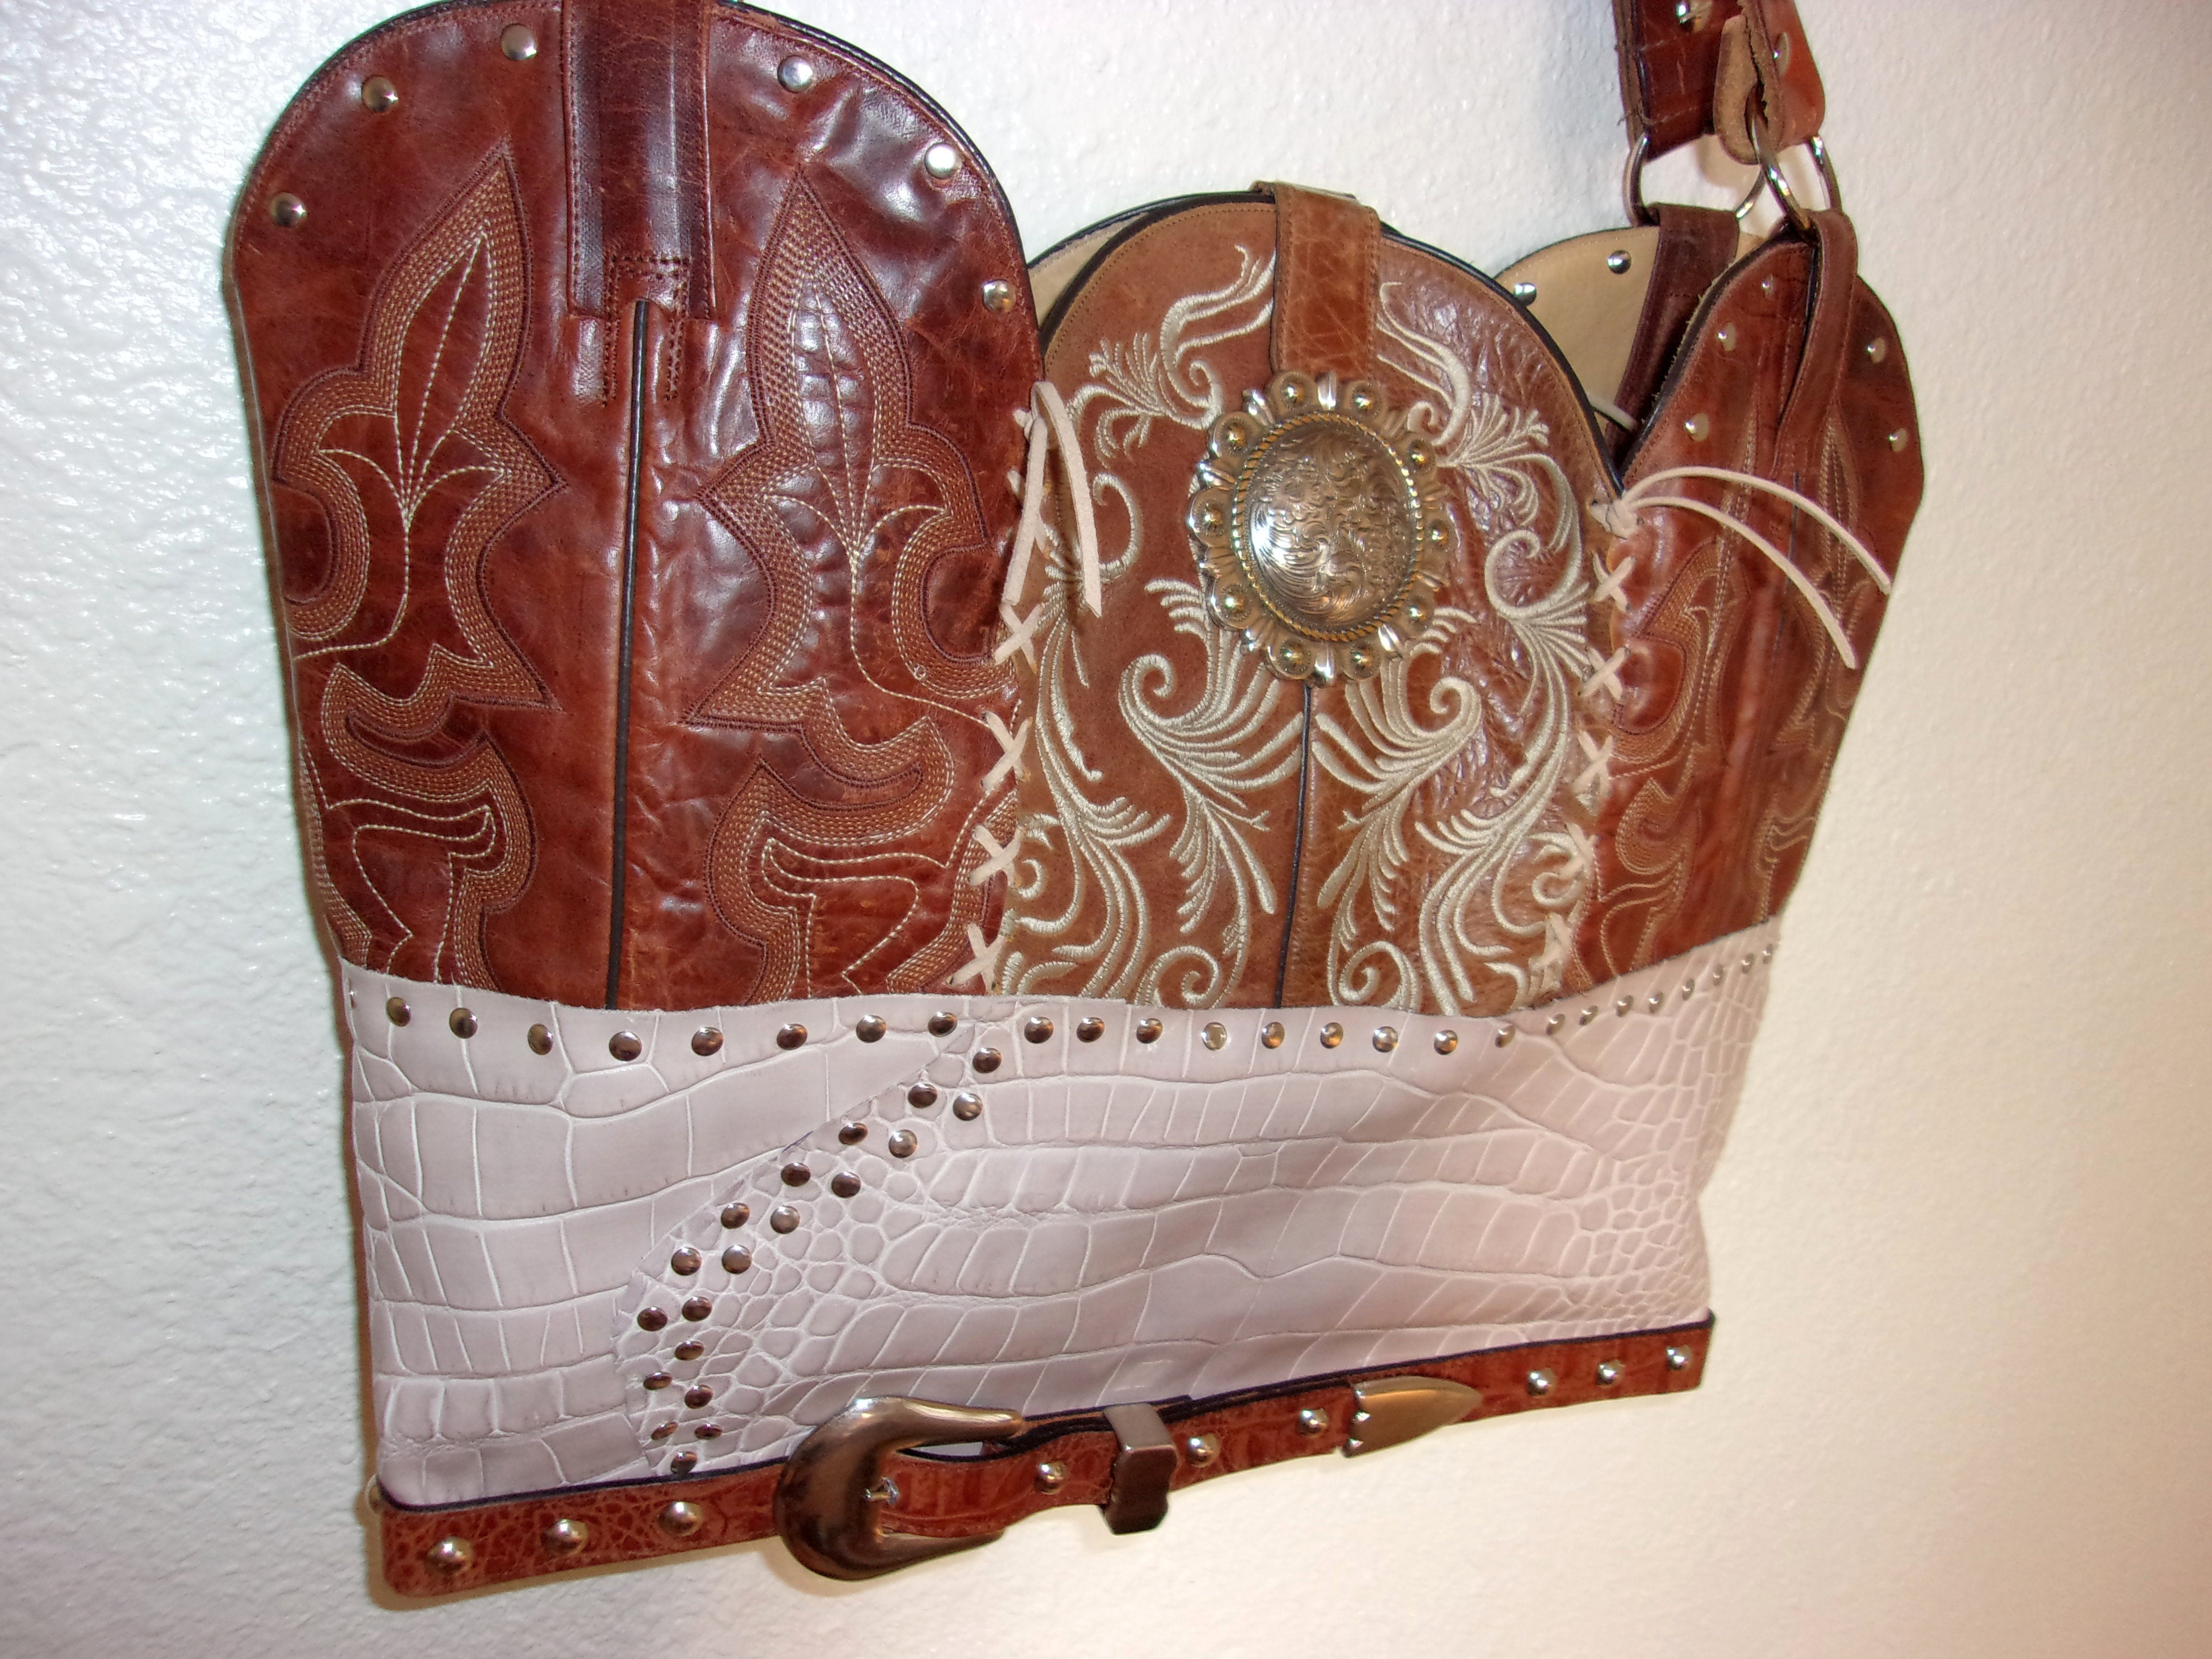 Western Laptop Tote - Extra Large Cowboy Boot Purse - Western Travel Bag LT25 cowboy boot purses, western fringe purse, handmade leather purses, boot purse, handmade western purse, custom leather handbags Chris Thompson Bags